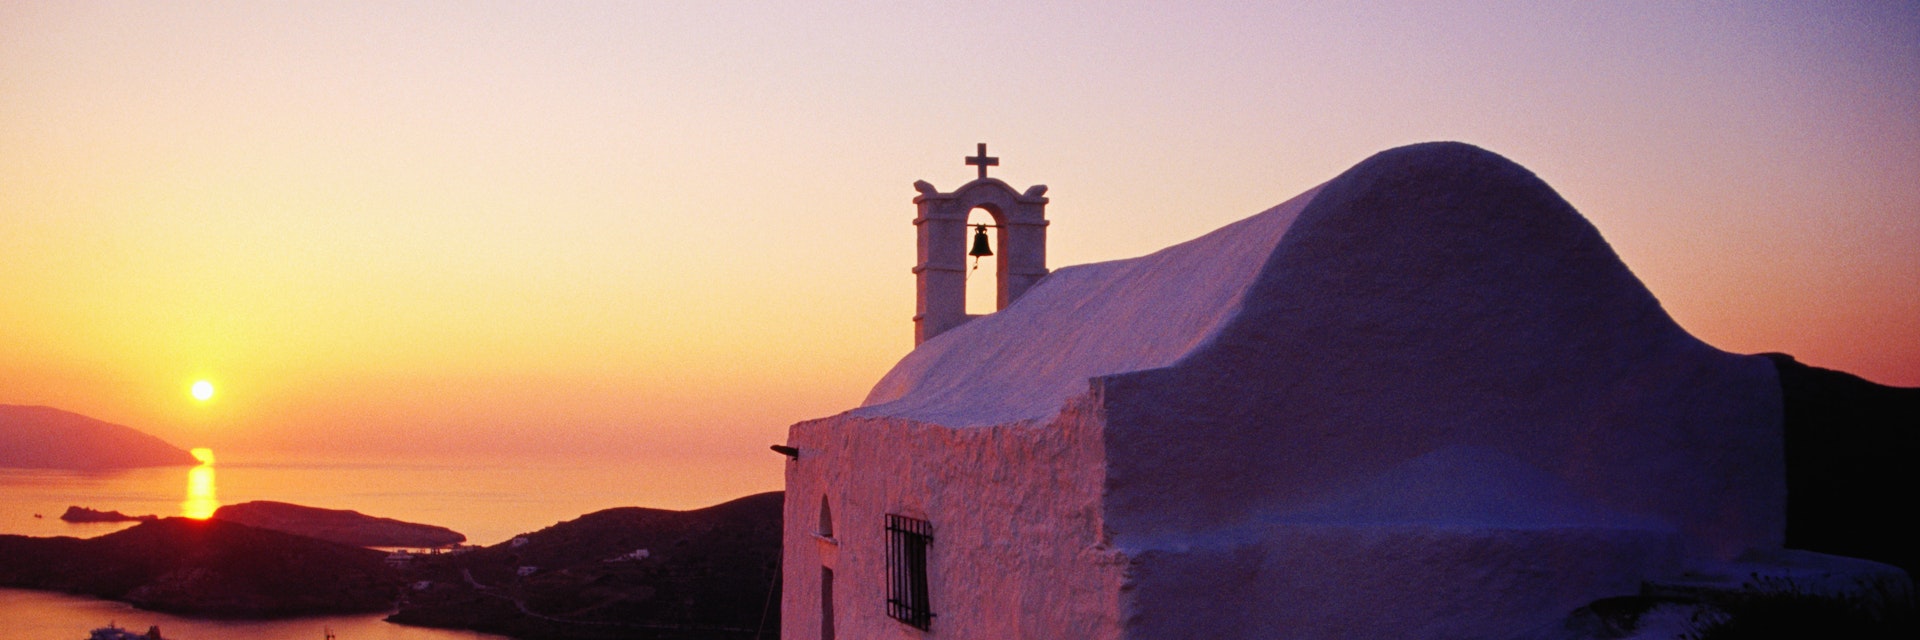 Whitewashed hilltop church and Aegean Sea at sunset.